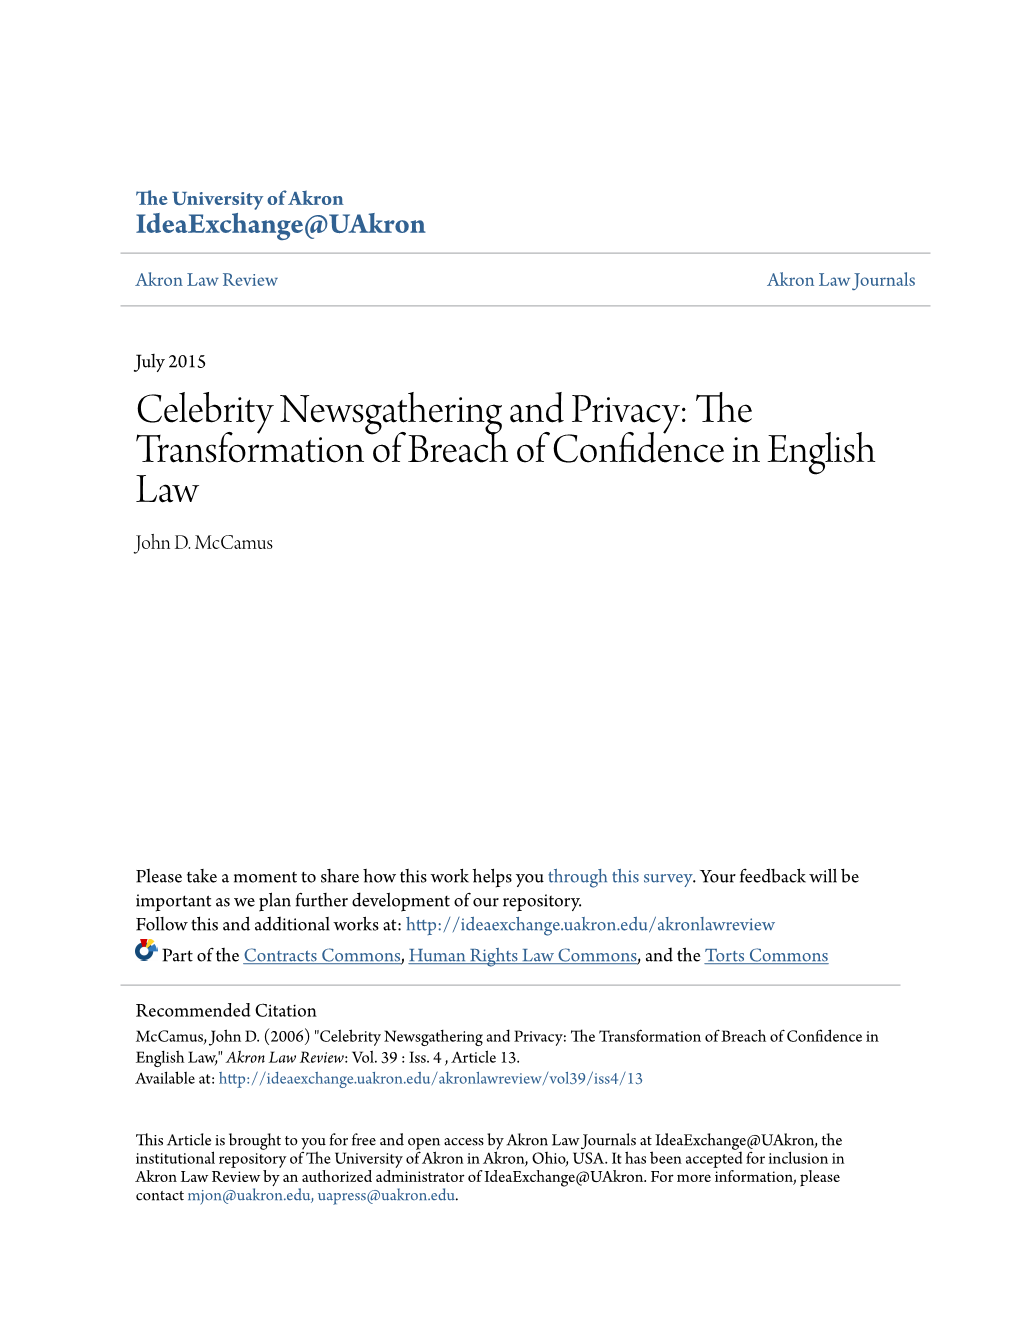 Celebrity Newsgathering and Privacy: the Transformation of Breach of Confidence in English Law John D